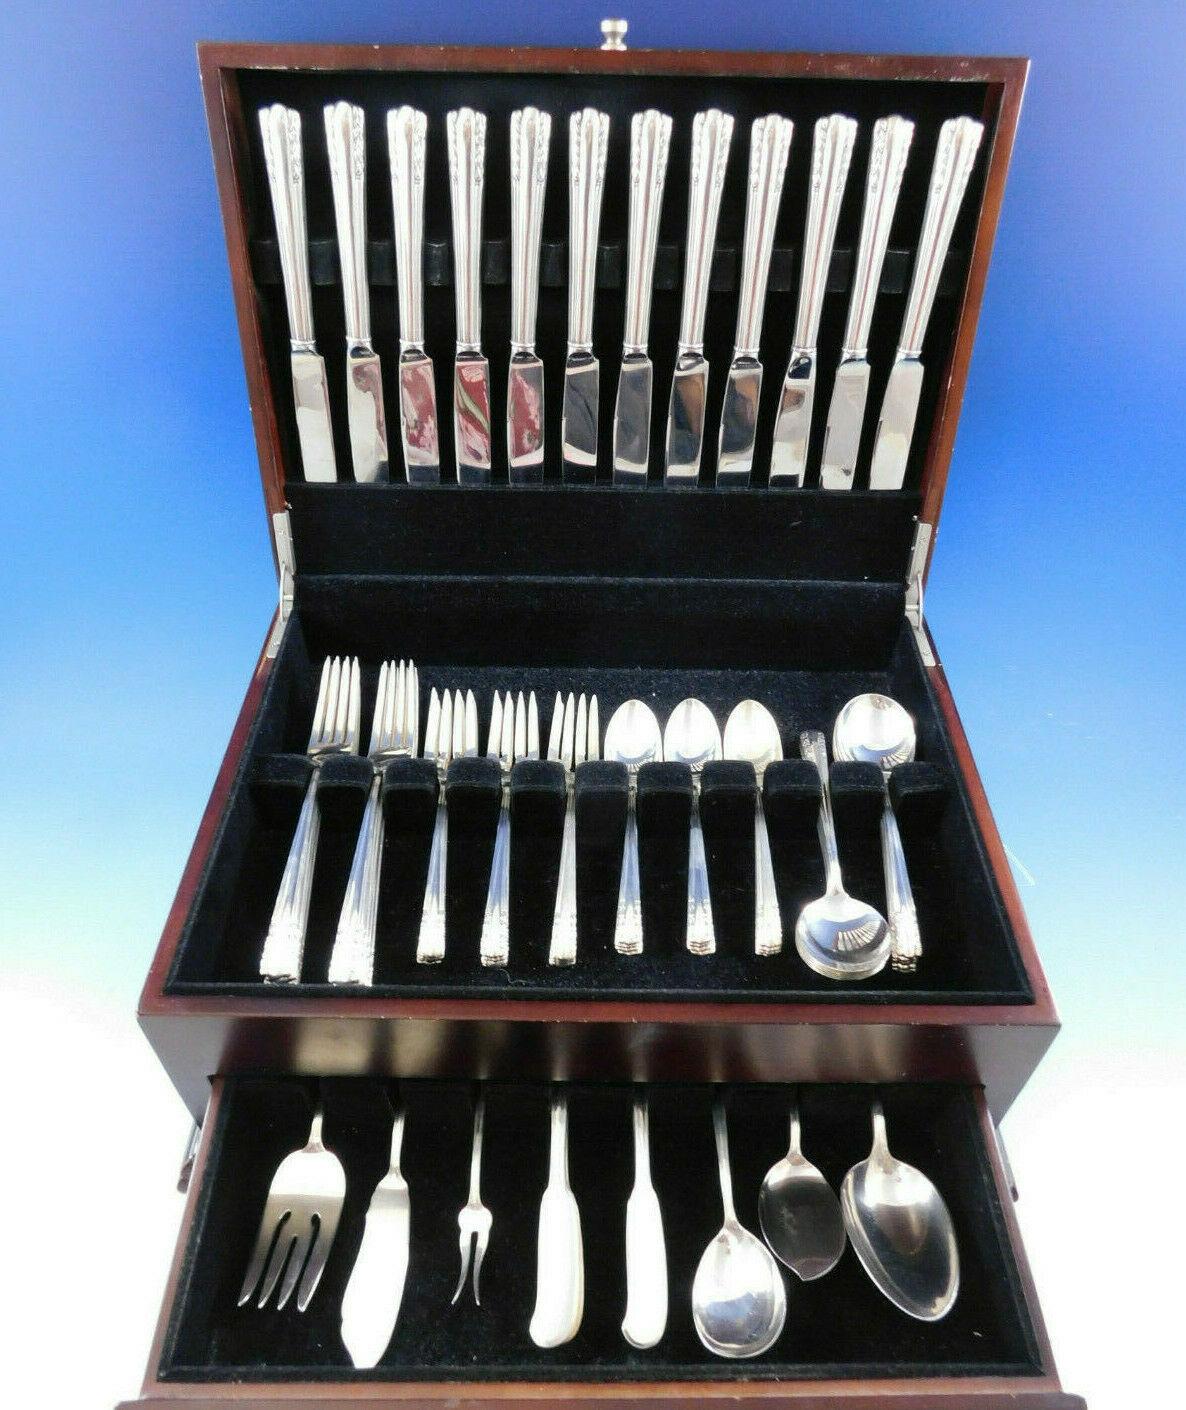 Dinner size chapel bells by Alvin sterling silver flatware set, 79 pieces. this set includes

12 dinner size knives, 9 1/2